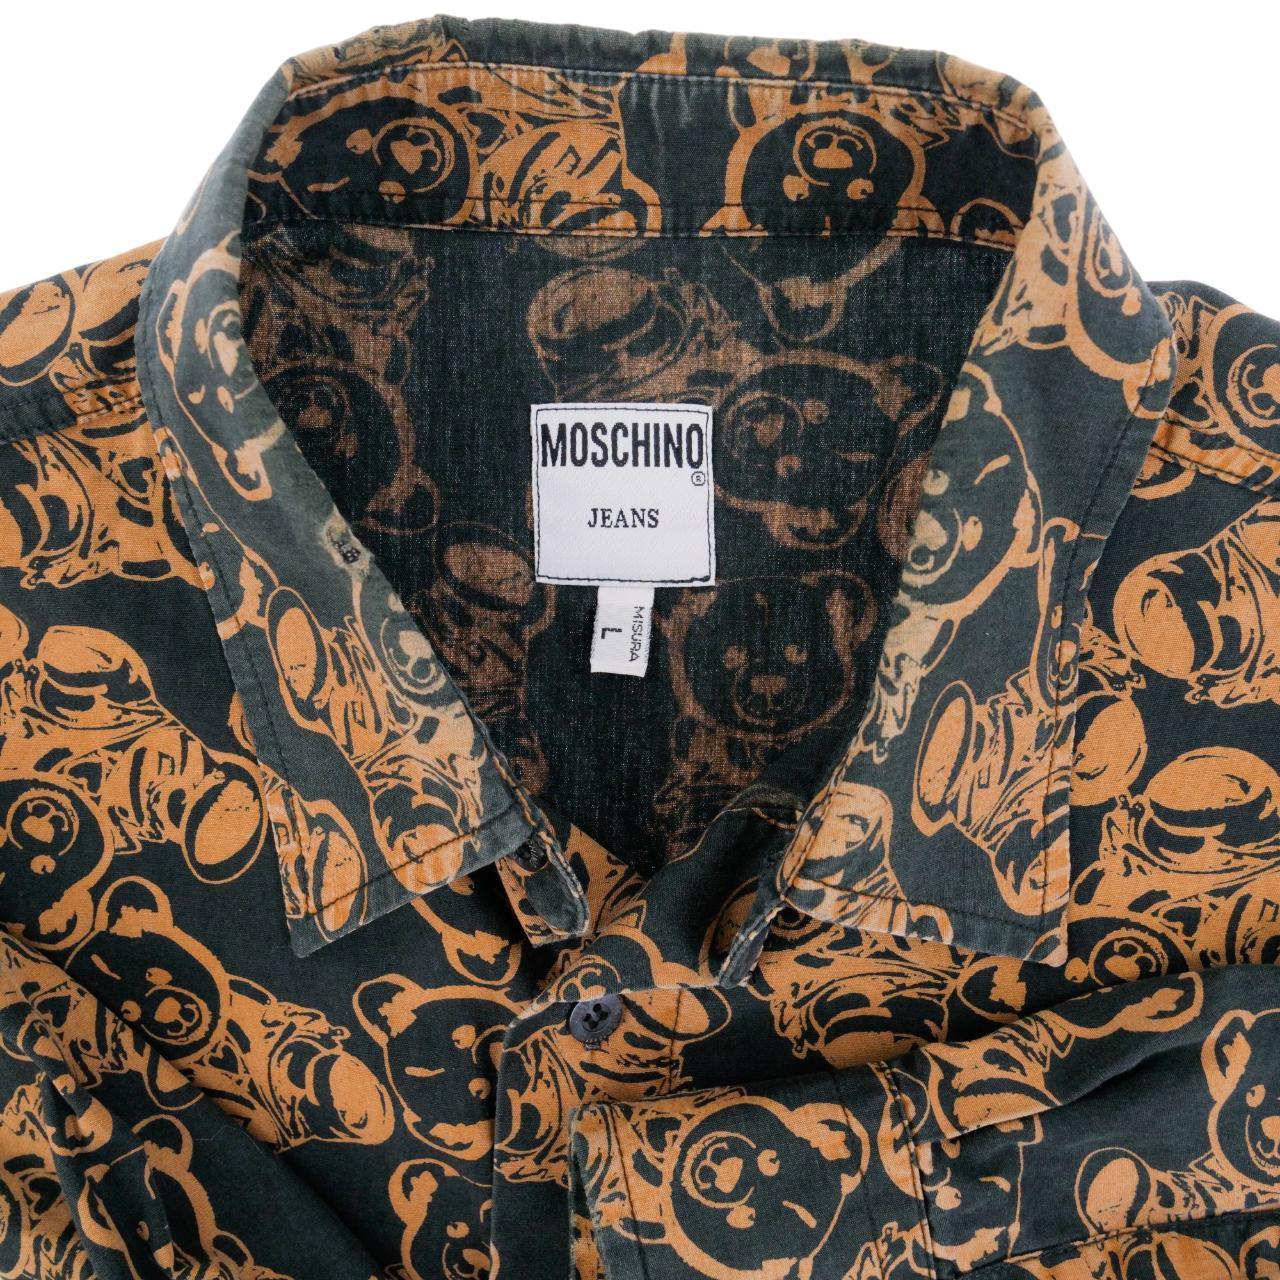 Vintage Moschino Bear Button Shirt Size L - Known Source